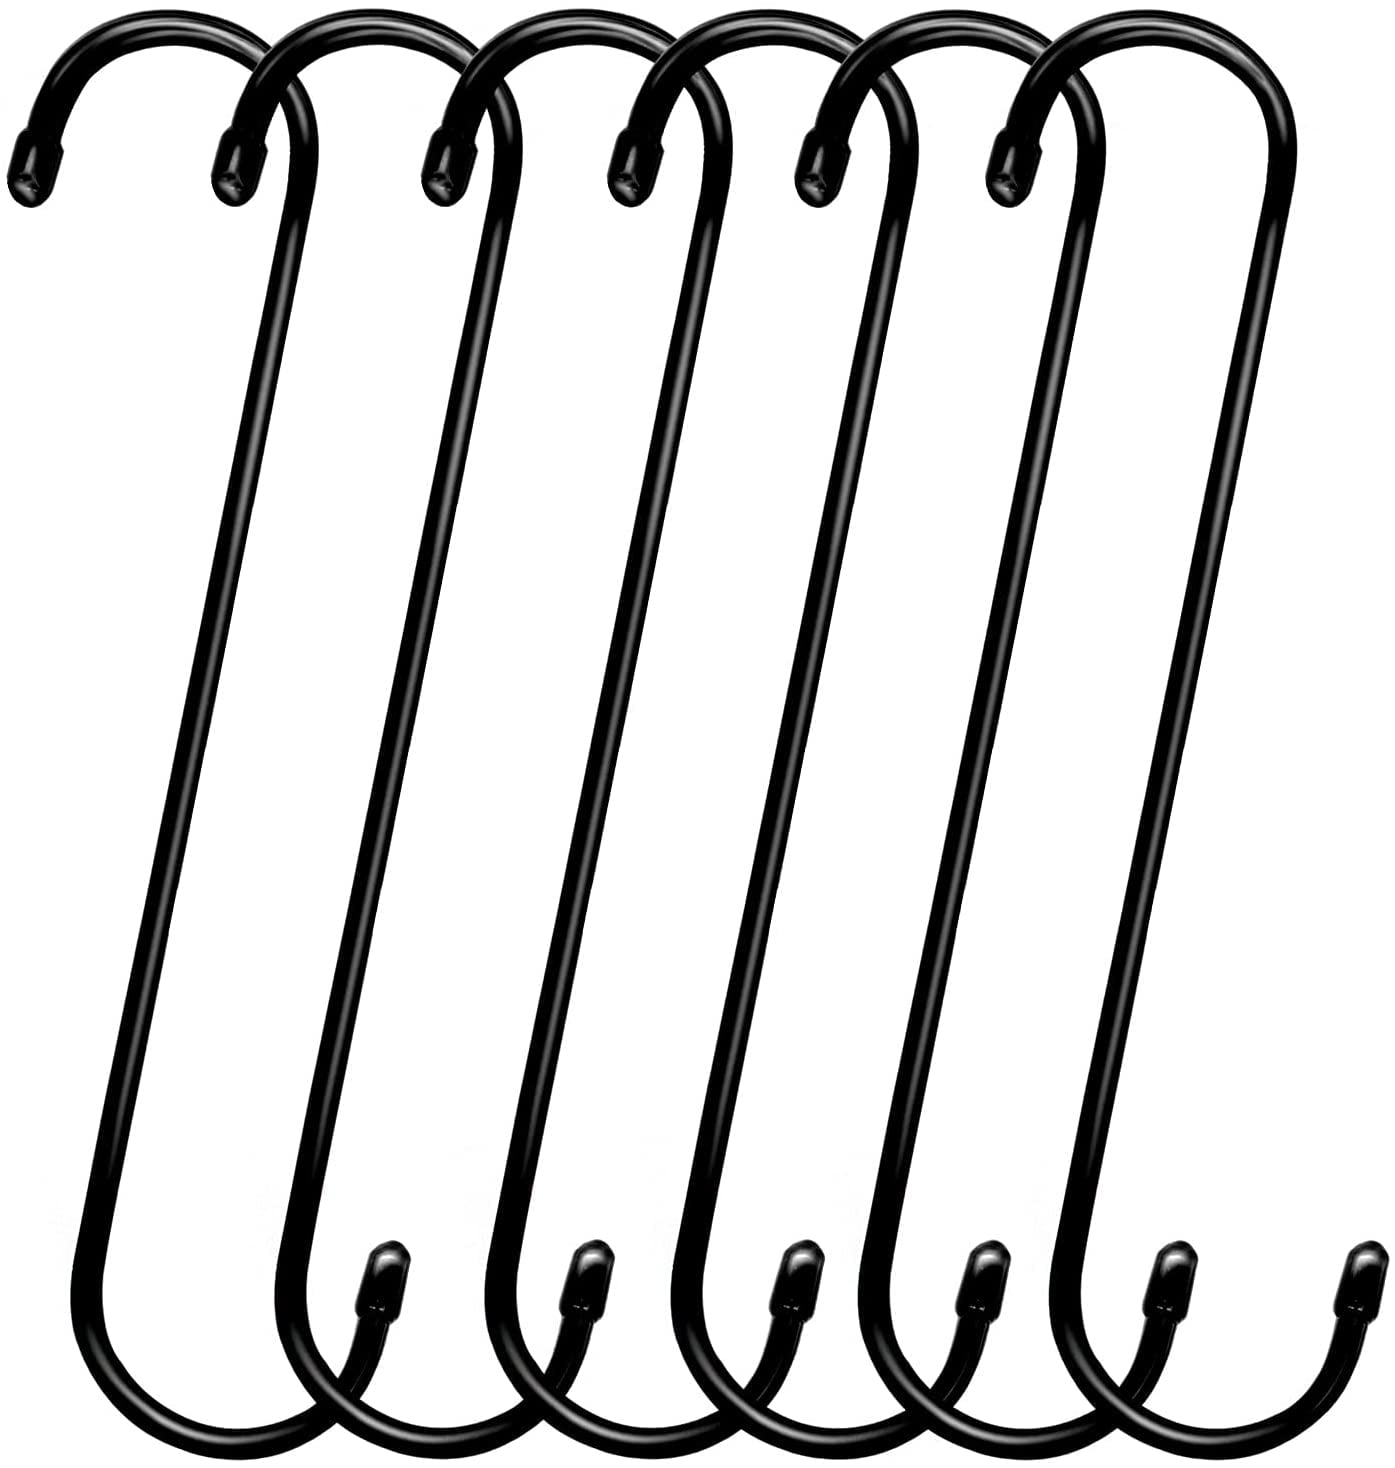 6-Inch Large S Hooks (Pack of 6), Non-Slip Vinyl Coated Black Hooks for  Hanging Plants, Pots, Pans, Utensils, Tools, Jeans & Clothes,  Outdoor/Indoor